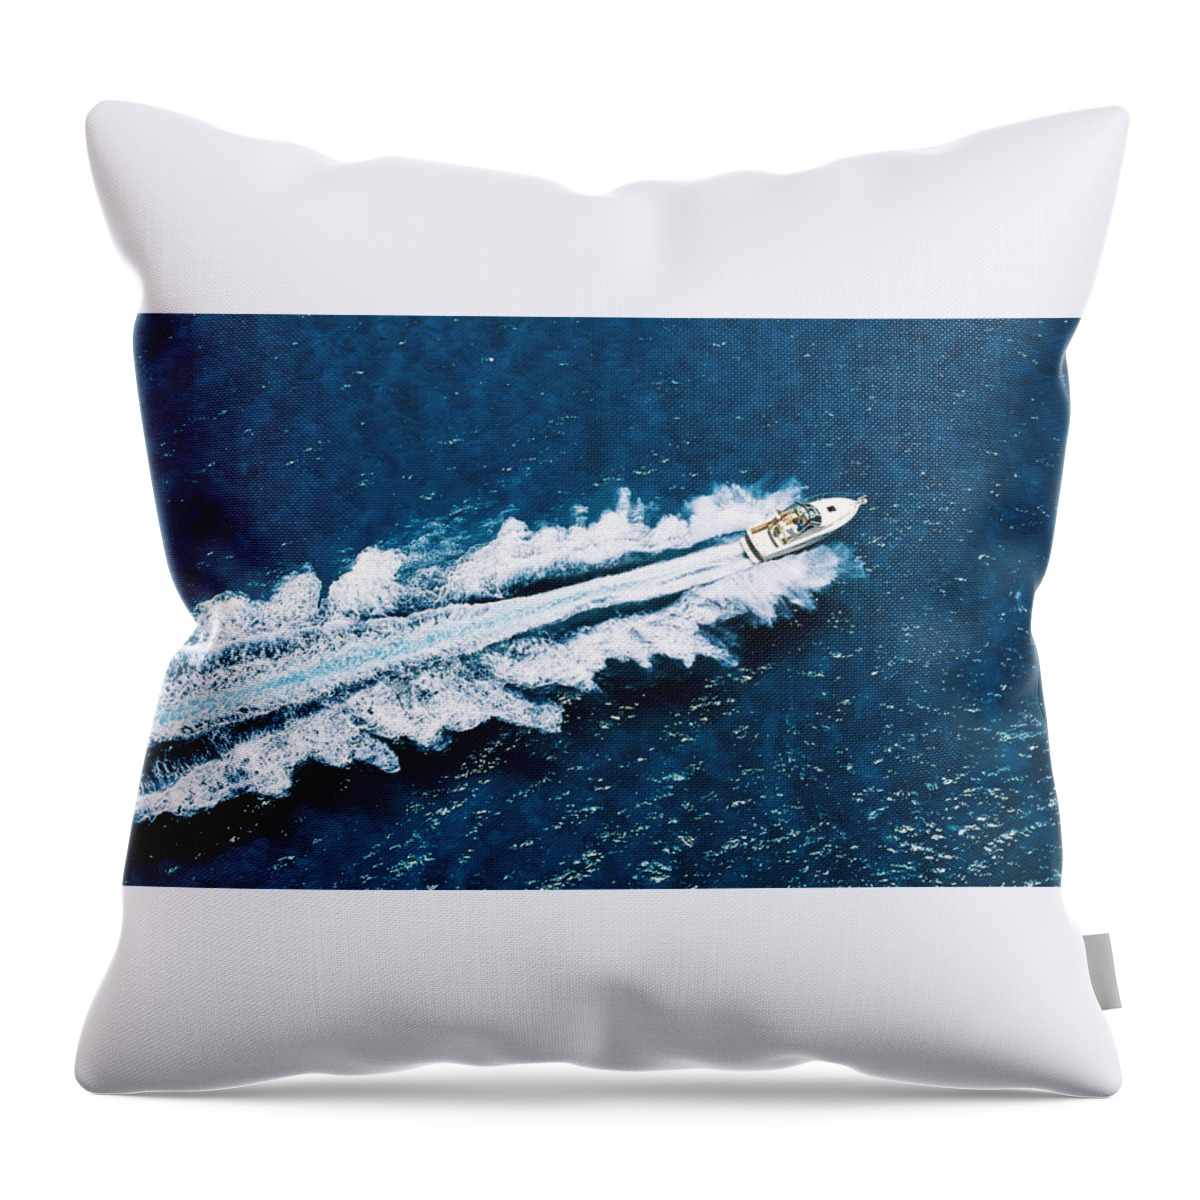 Boat Throw Pillow featuring the photograph Boat by Jackie Russo